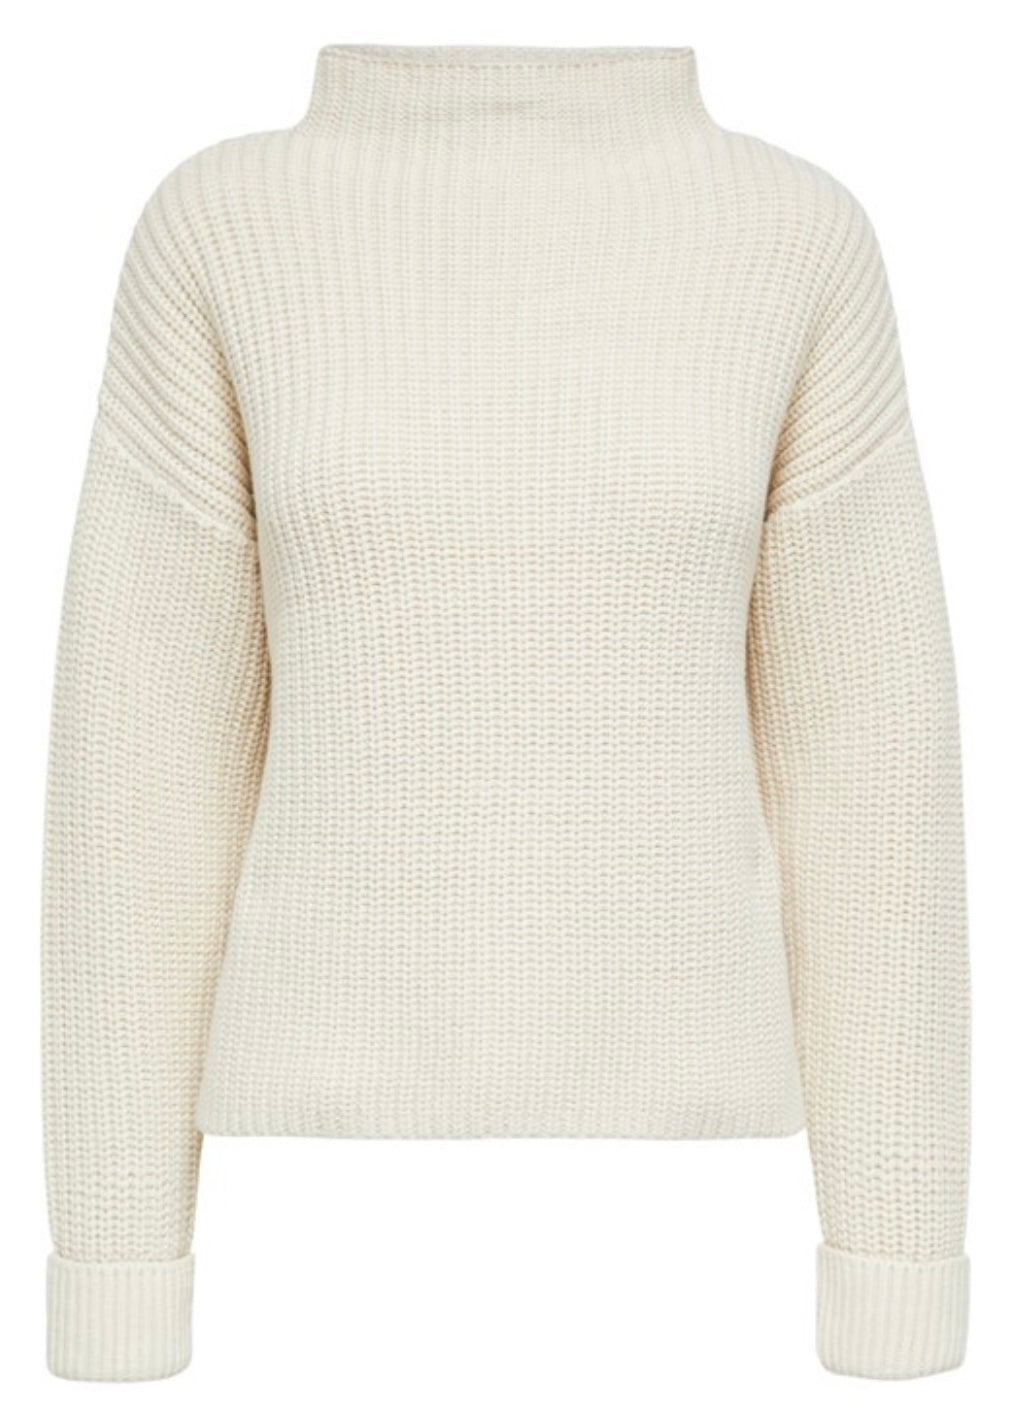 SELECTED FEMME - SELMA LS KNIT PULLOVER - BIRCH